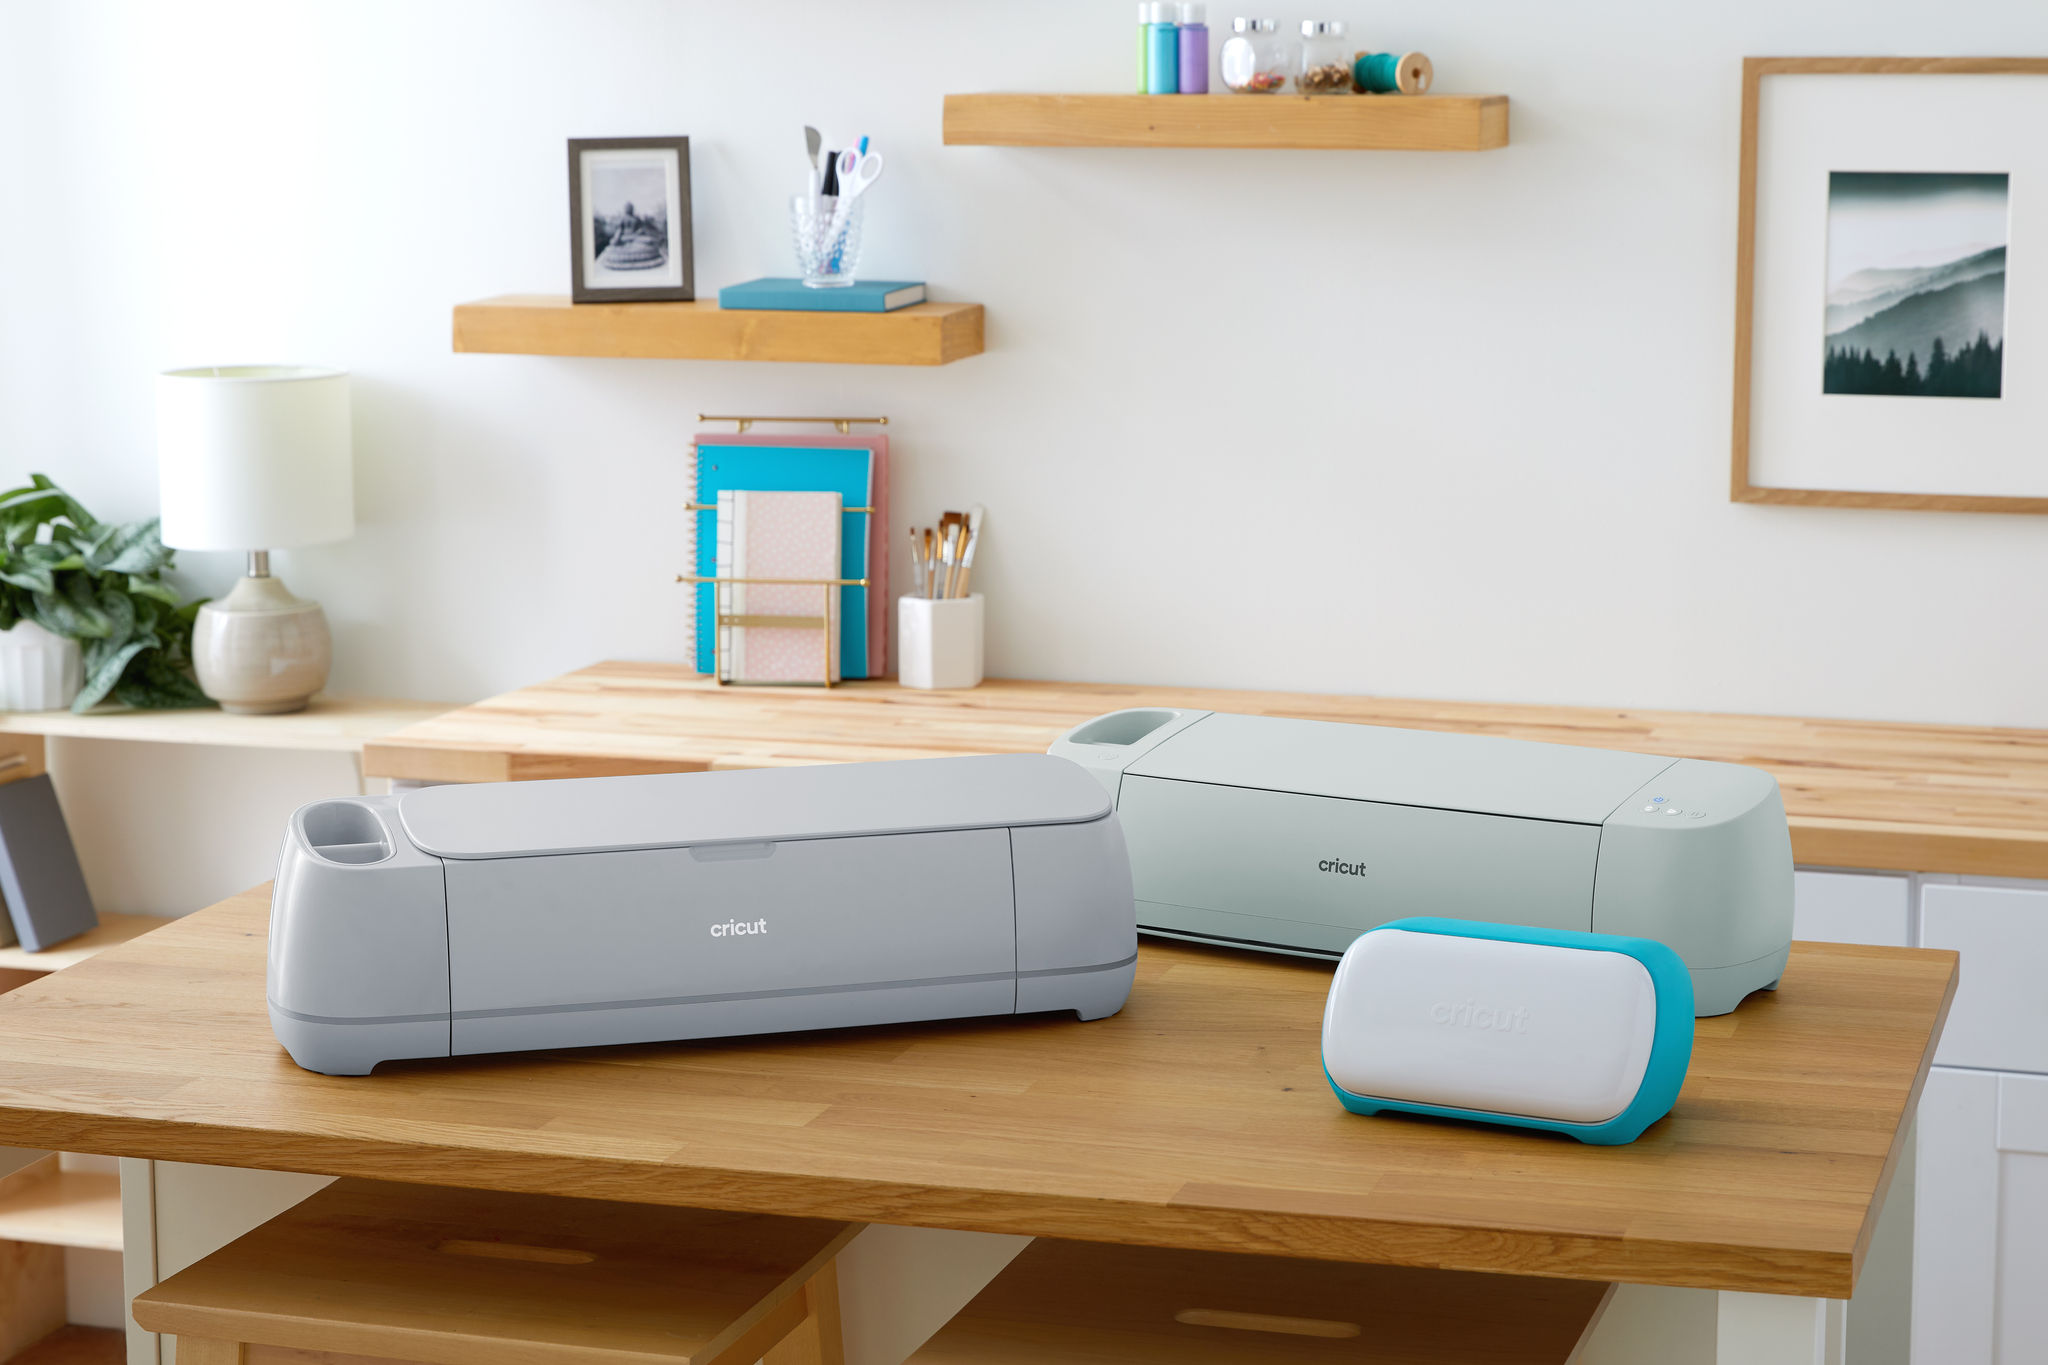 What Cricut machine to get your mom for Mother